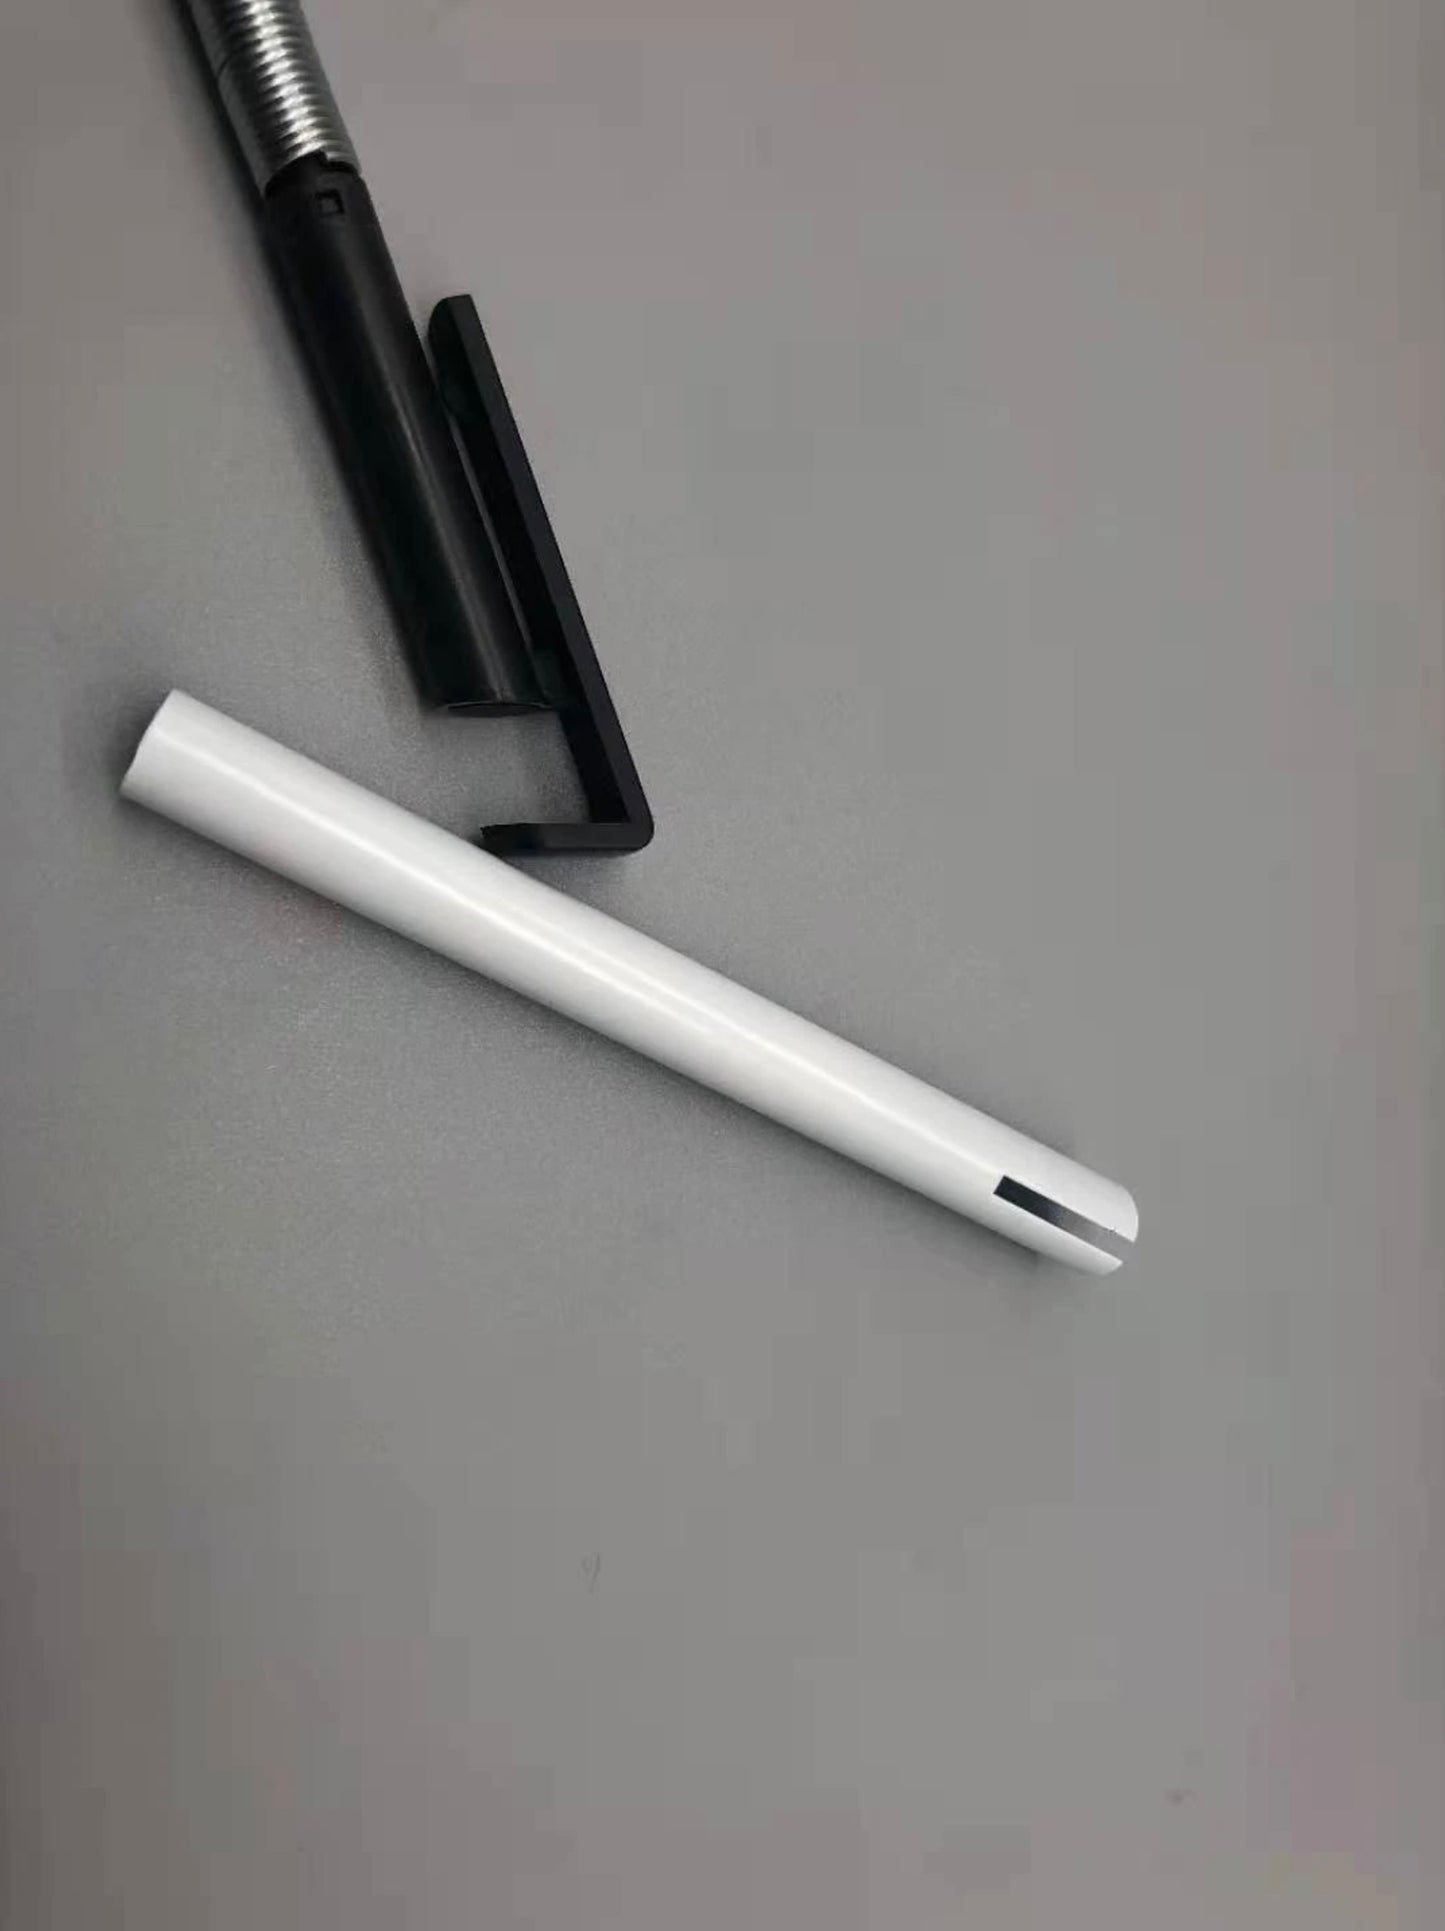 Sublimation Metal Pen Blanks, Black Ball Point